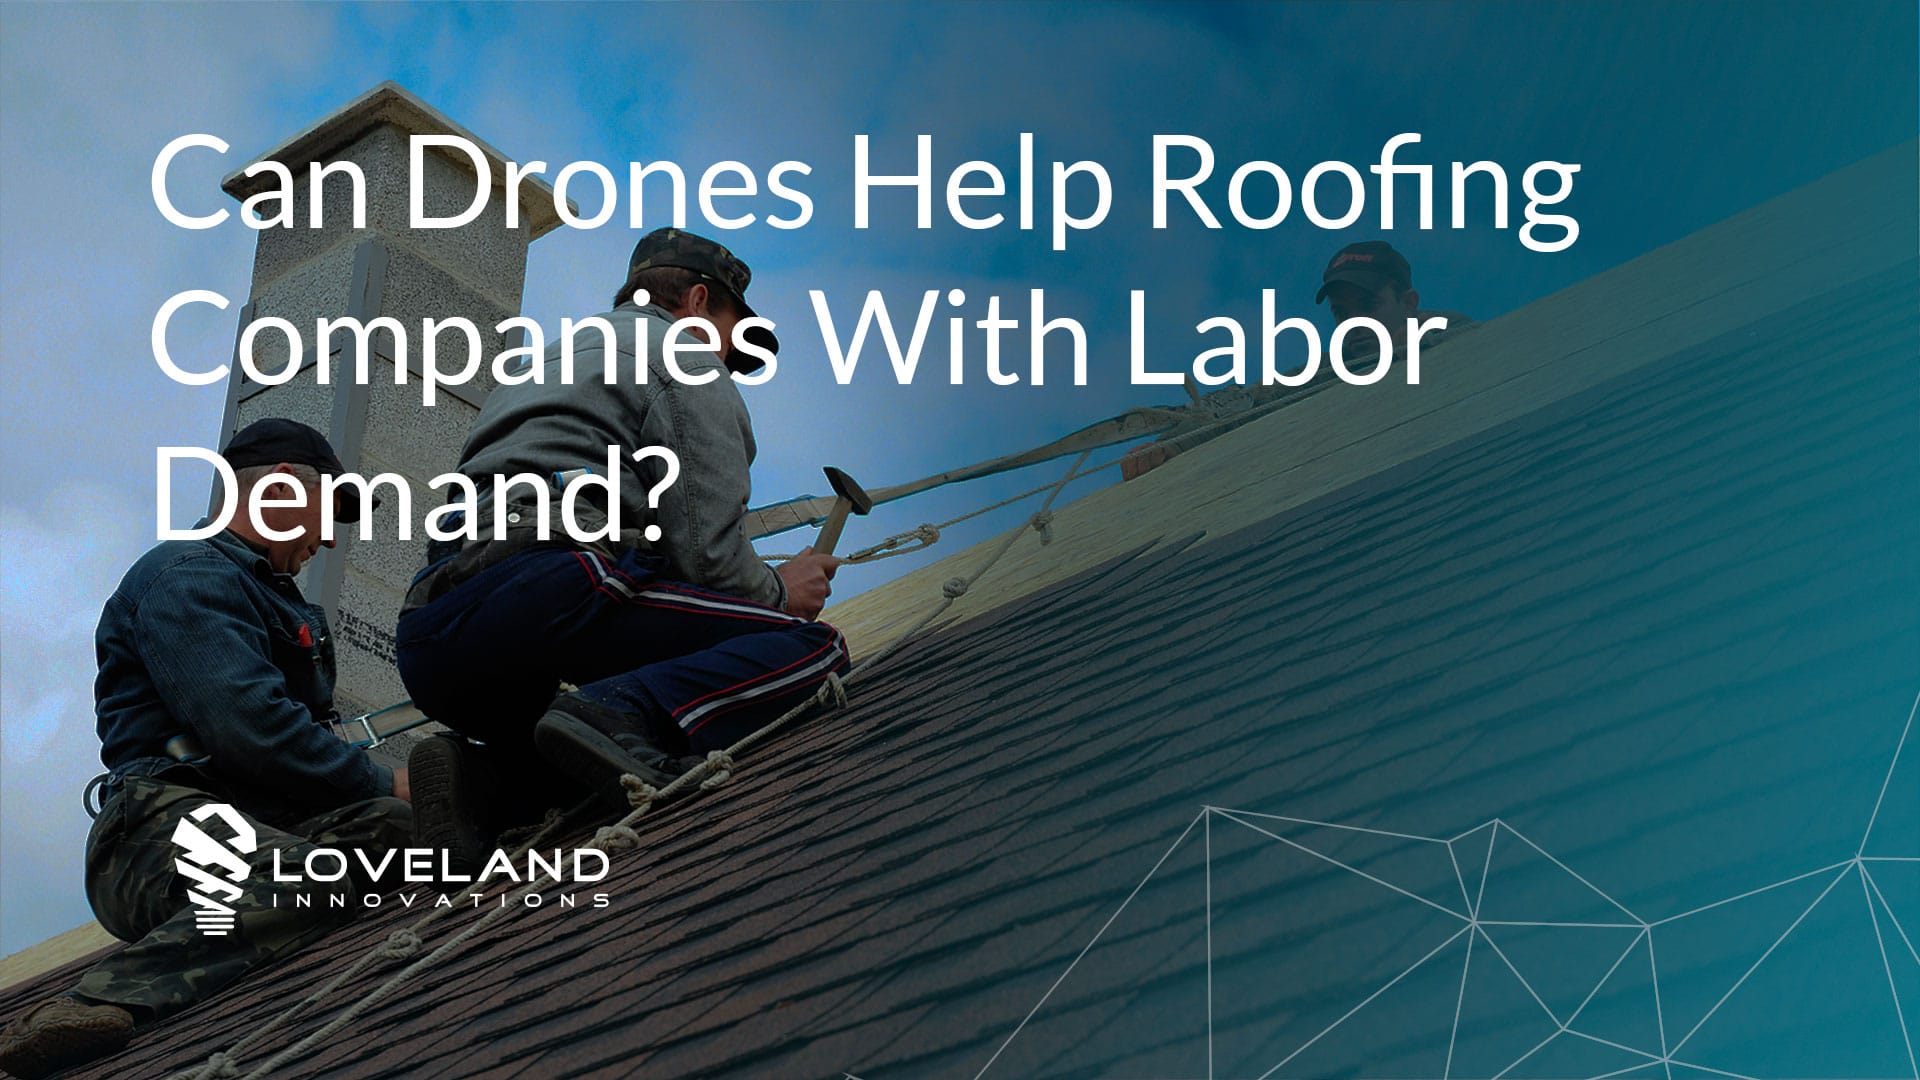 Drones for roofing